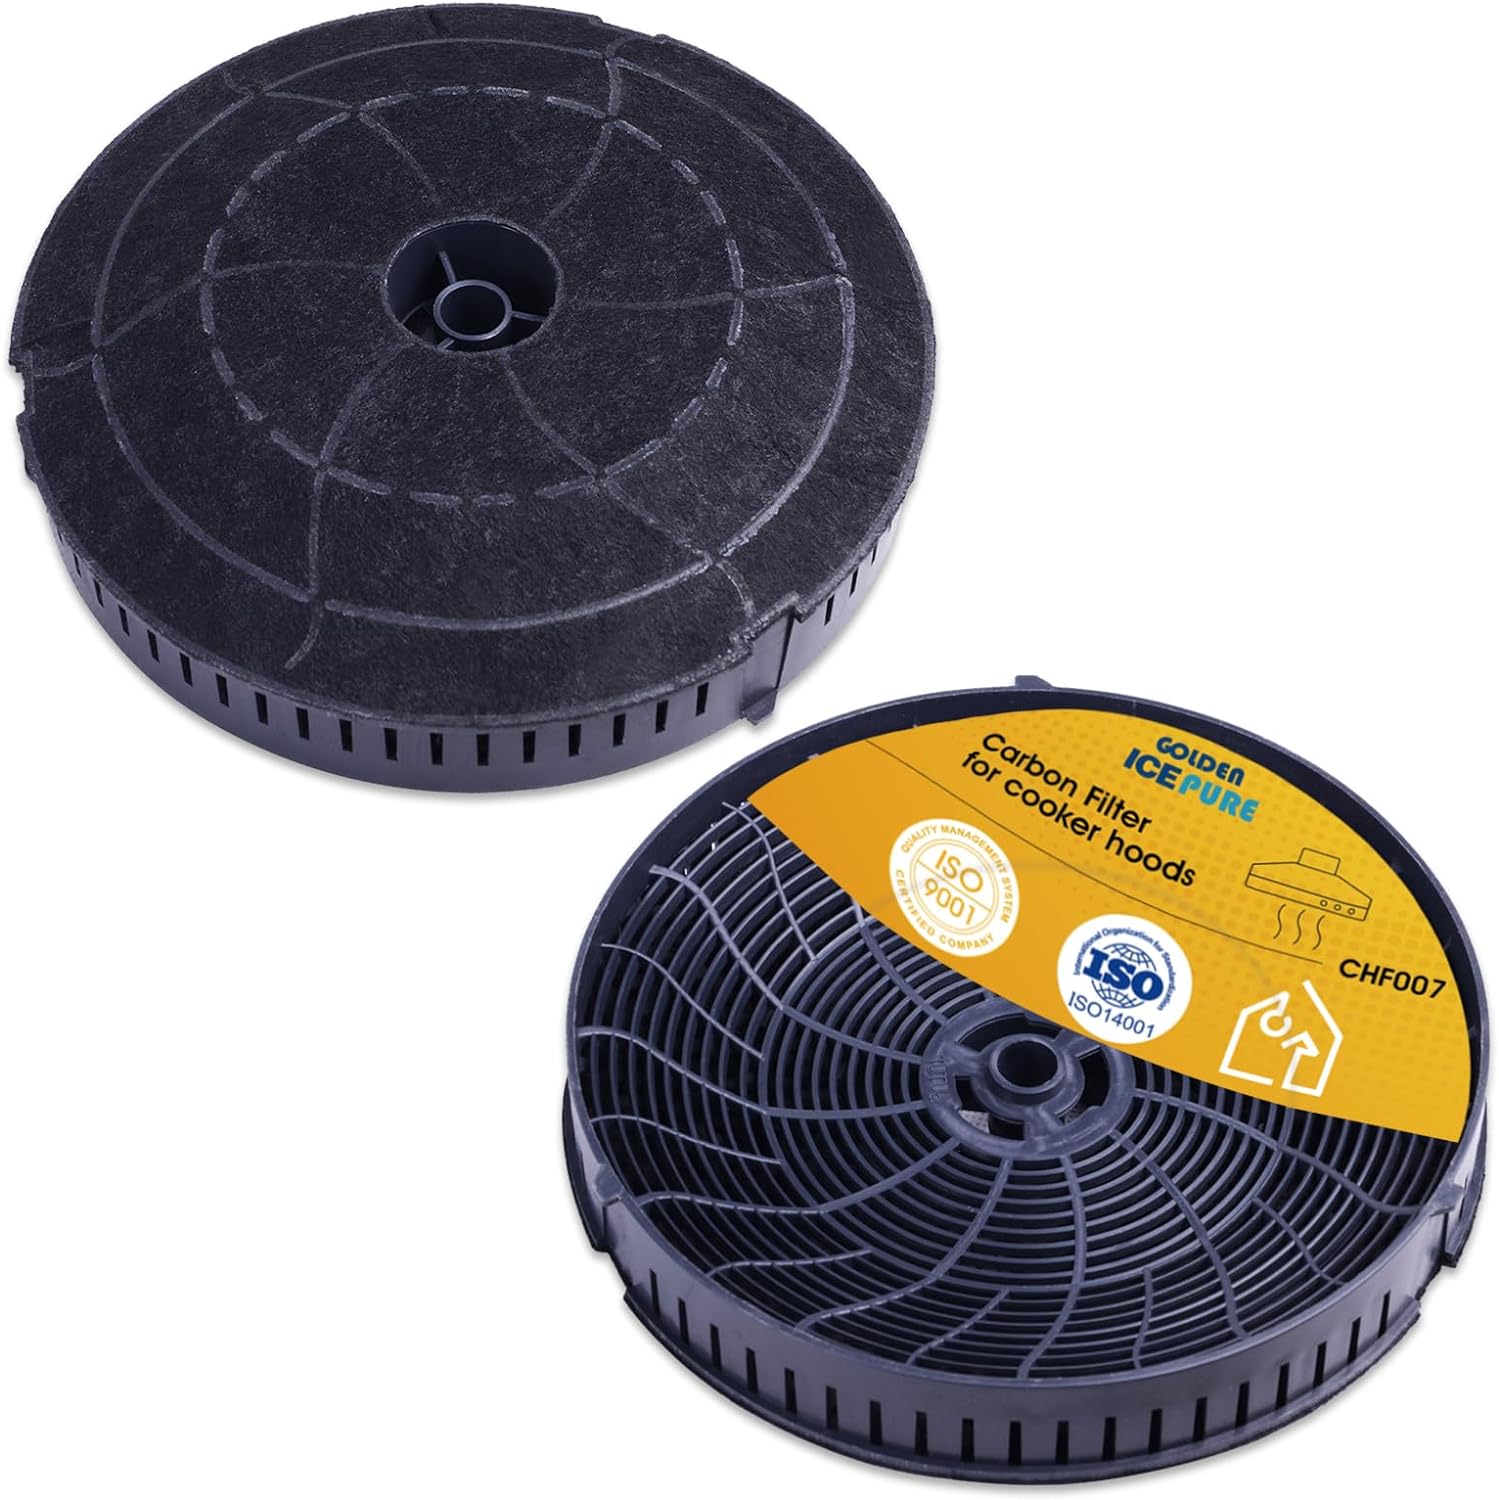 2 x Carbon Filter Activated Carbon Filter Replacement-0373